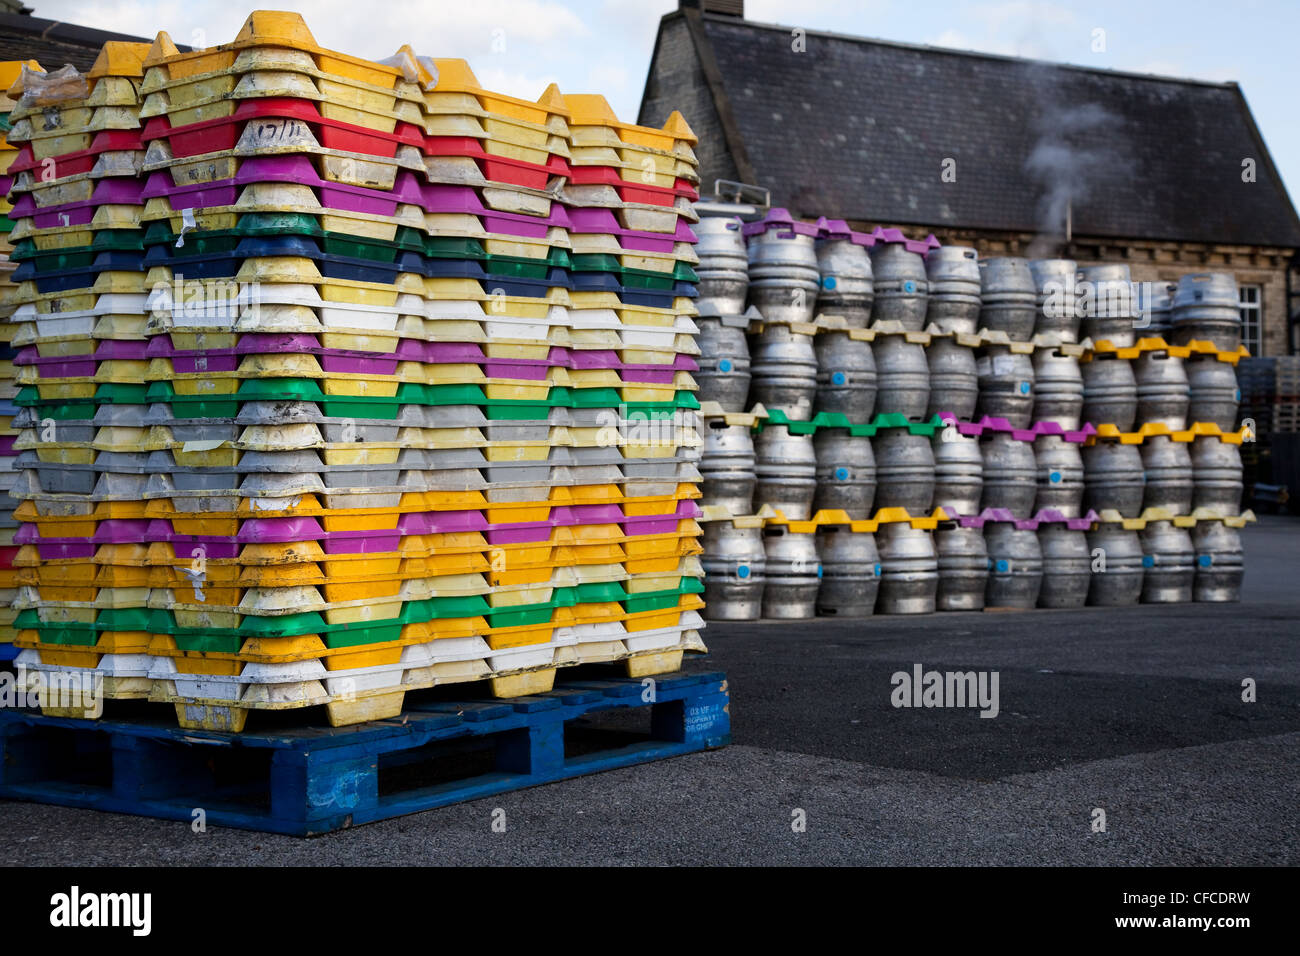 A stack of 41 Litre Aluminium Beer Kegs; ECasks stacked at The Black Sheep Brewery, Masham, North Yorkshire Dales, Richmondshire, UK Stock Photo